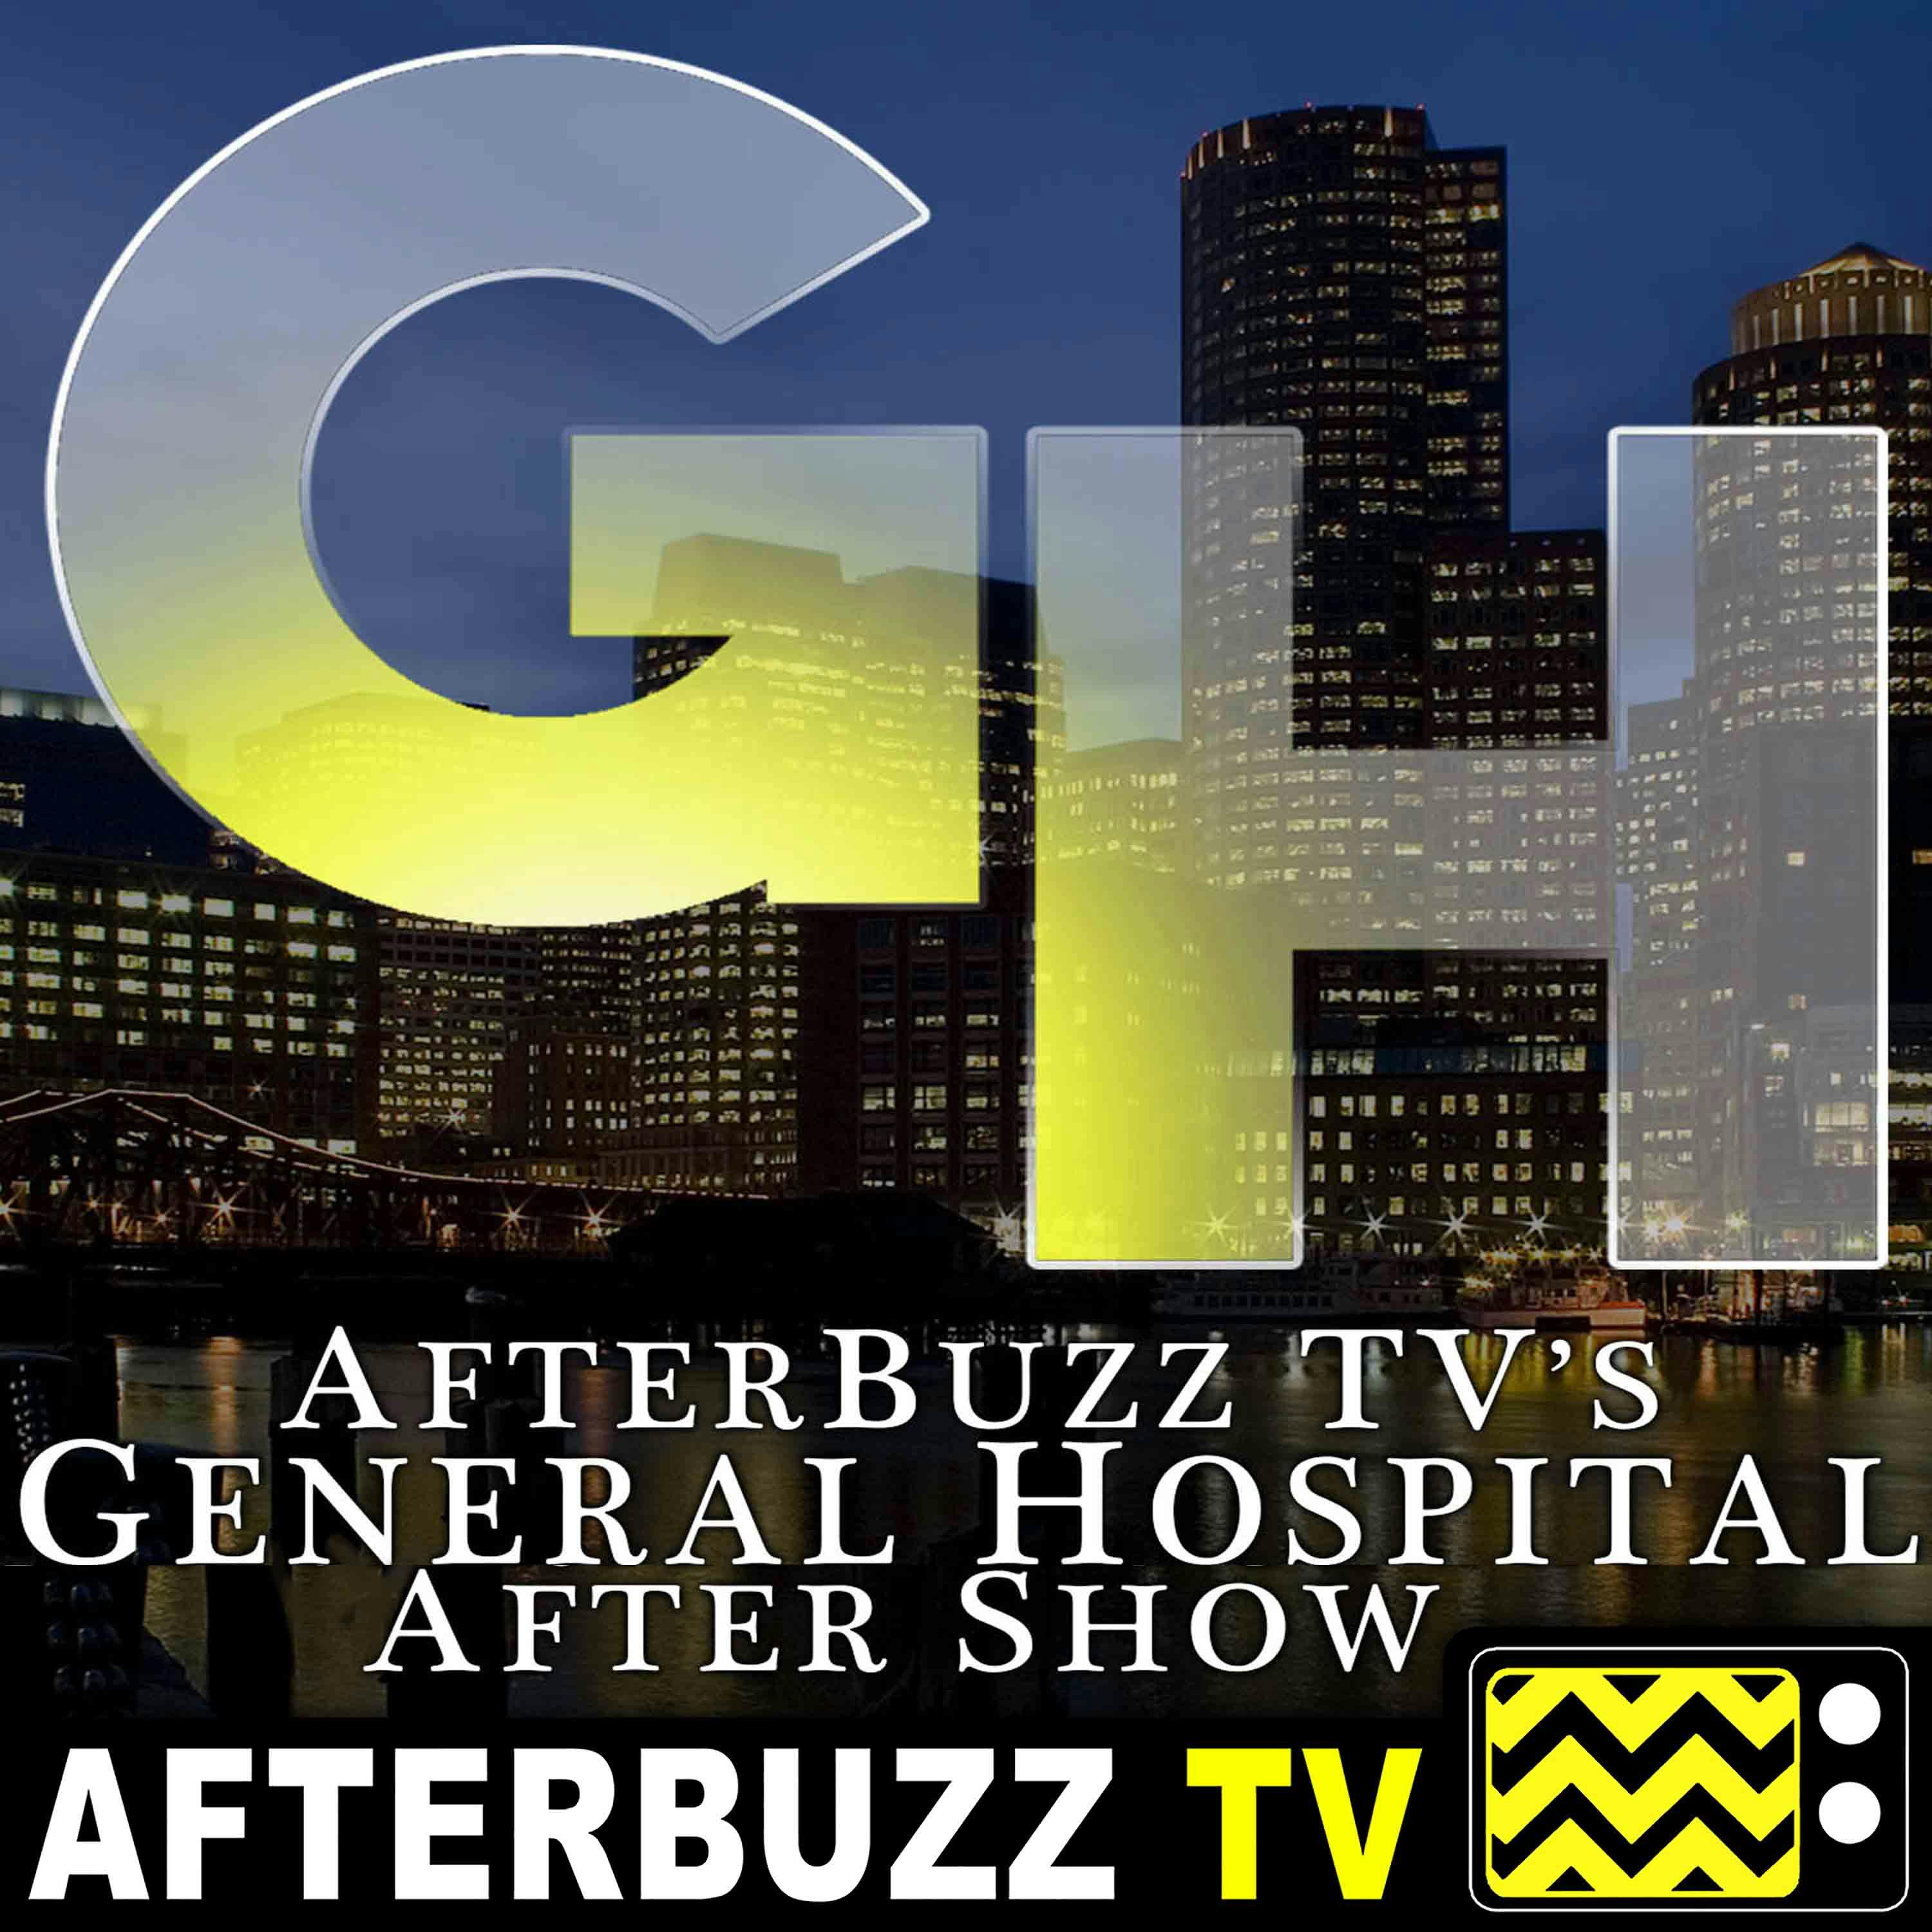 ’April 22nd - April 26th, 2019’ Review Of General Hospital